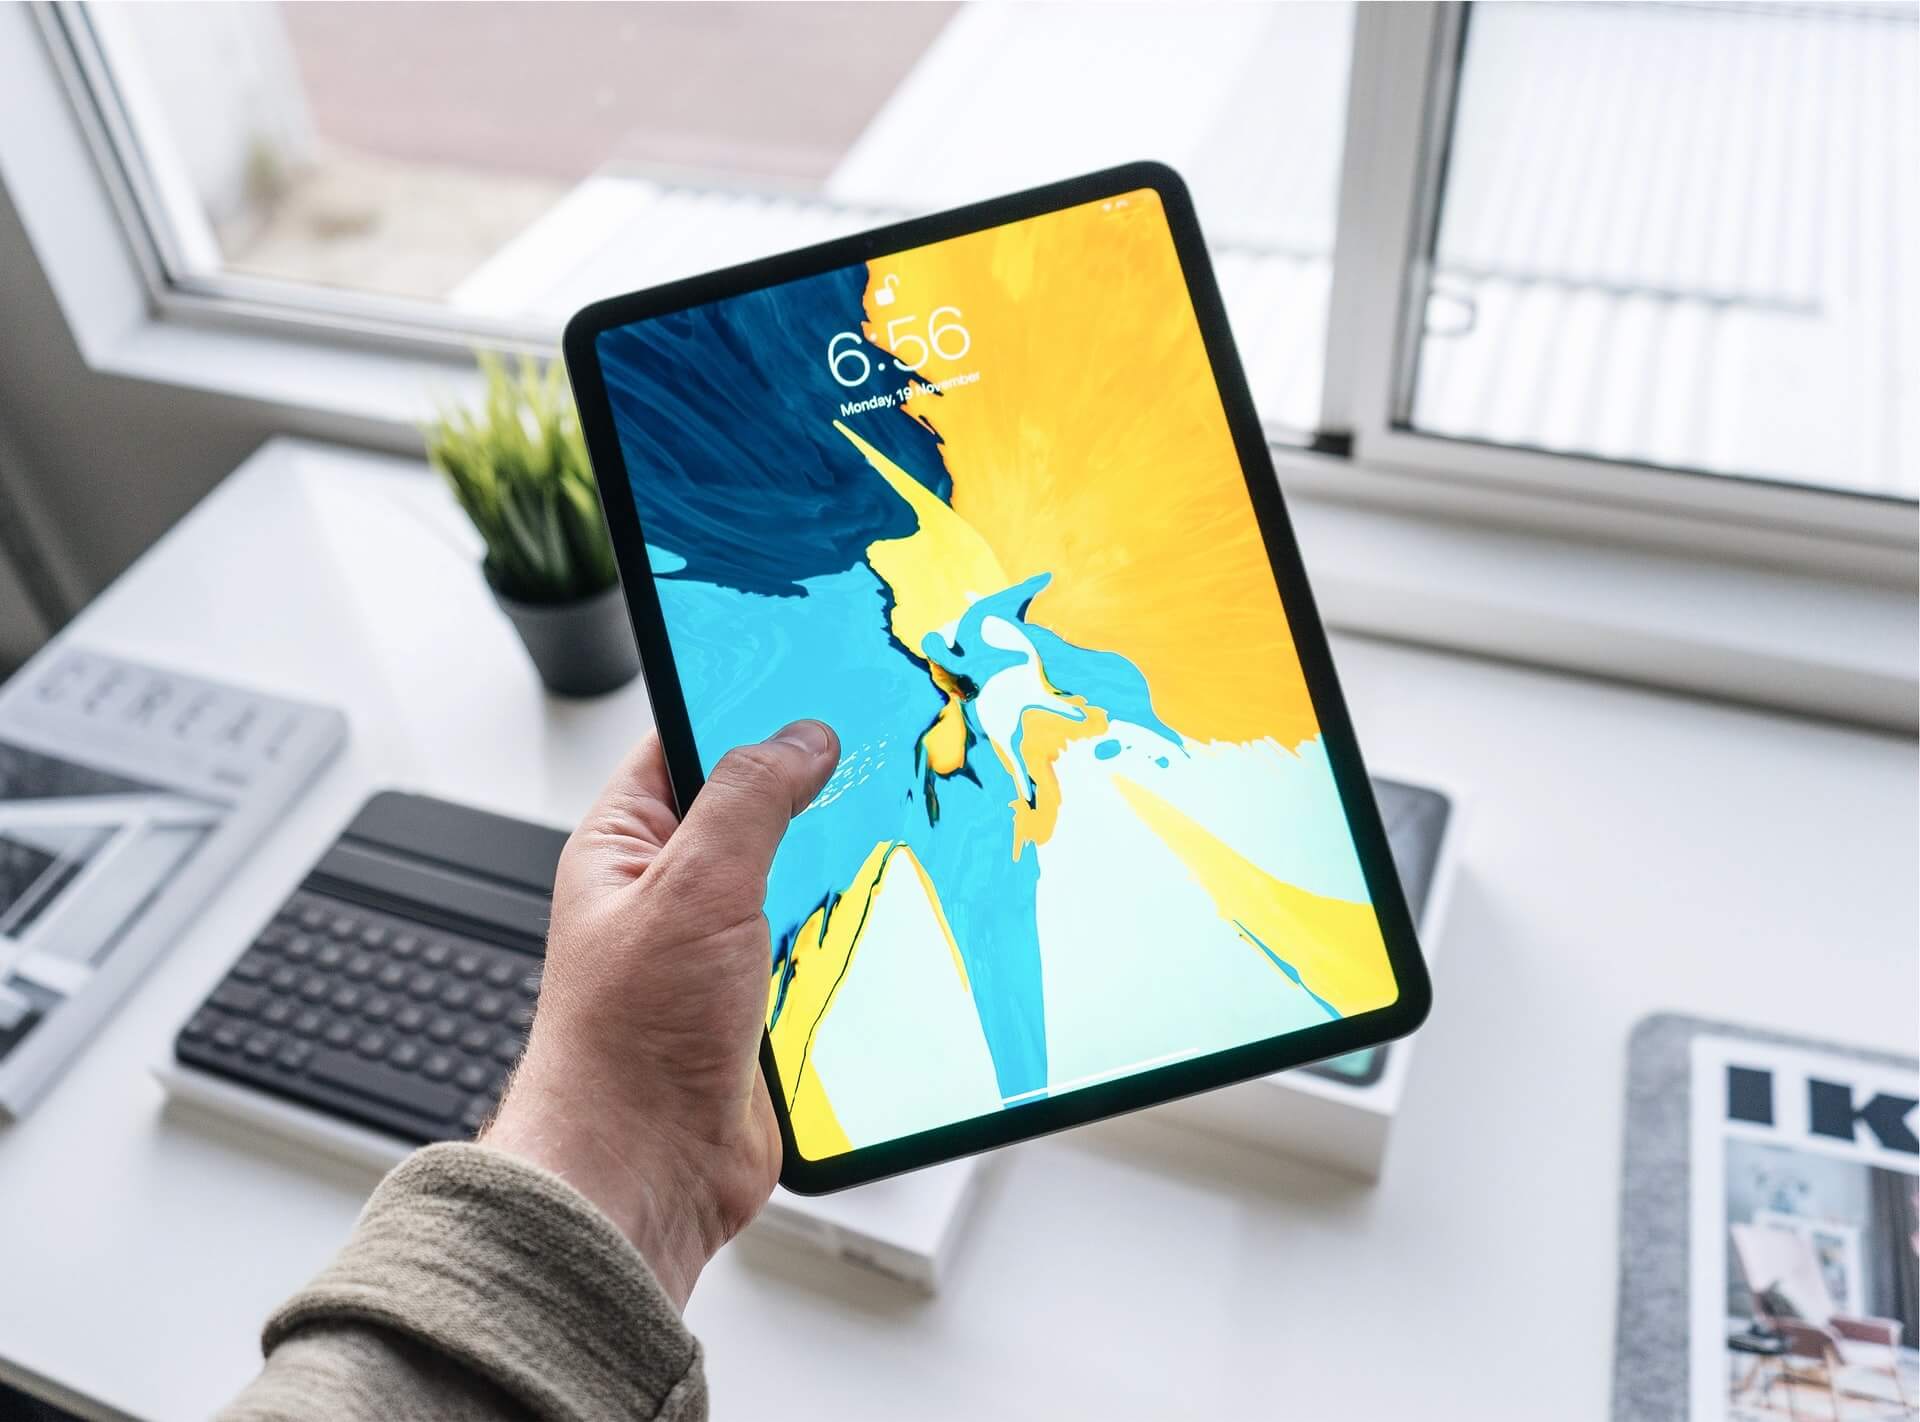 Person holding an iPad Pro over a white desk